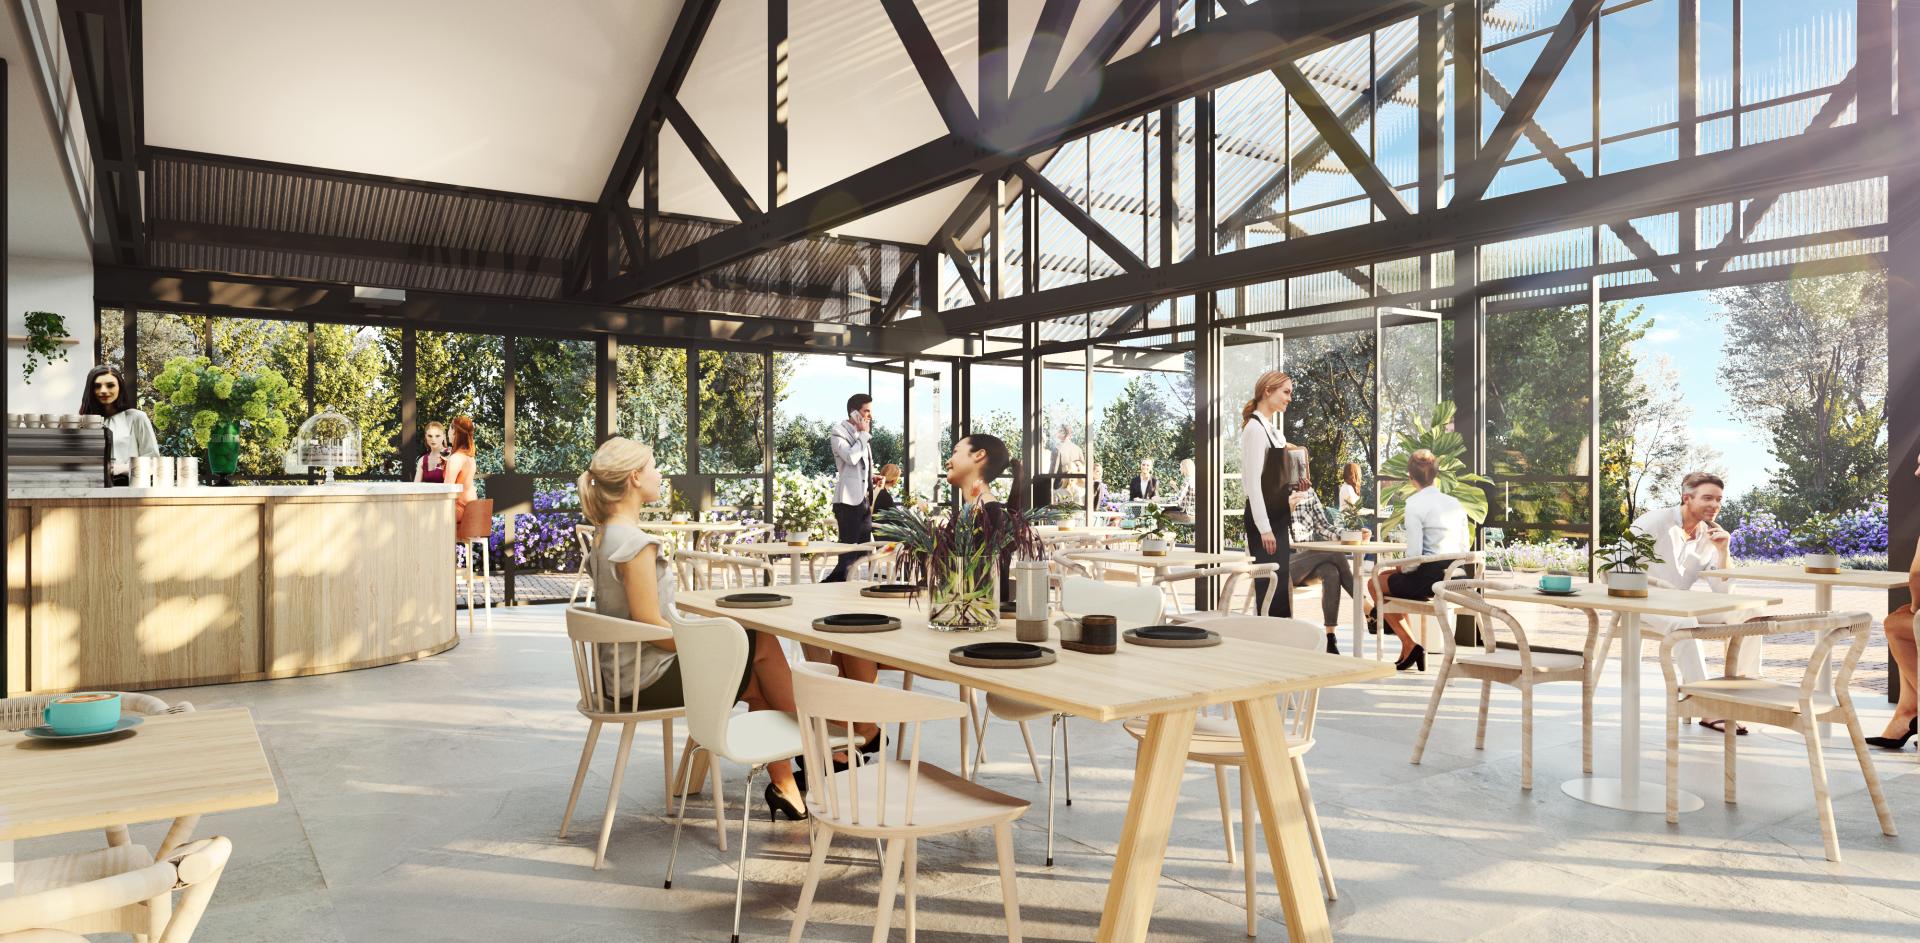 Artistic render of modern cafe building with customers sitting outside under trees and in gardens